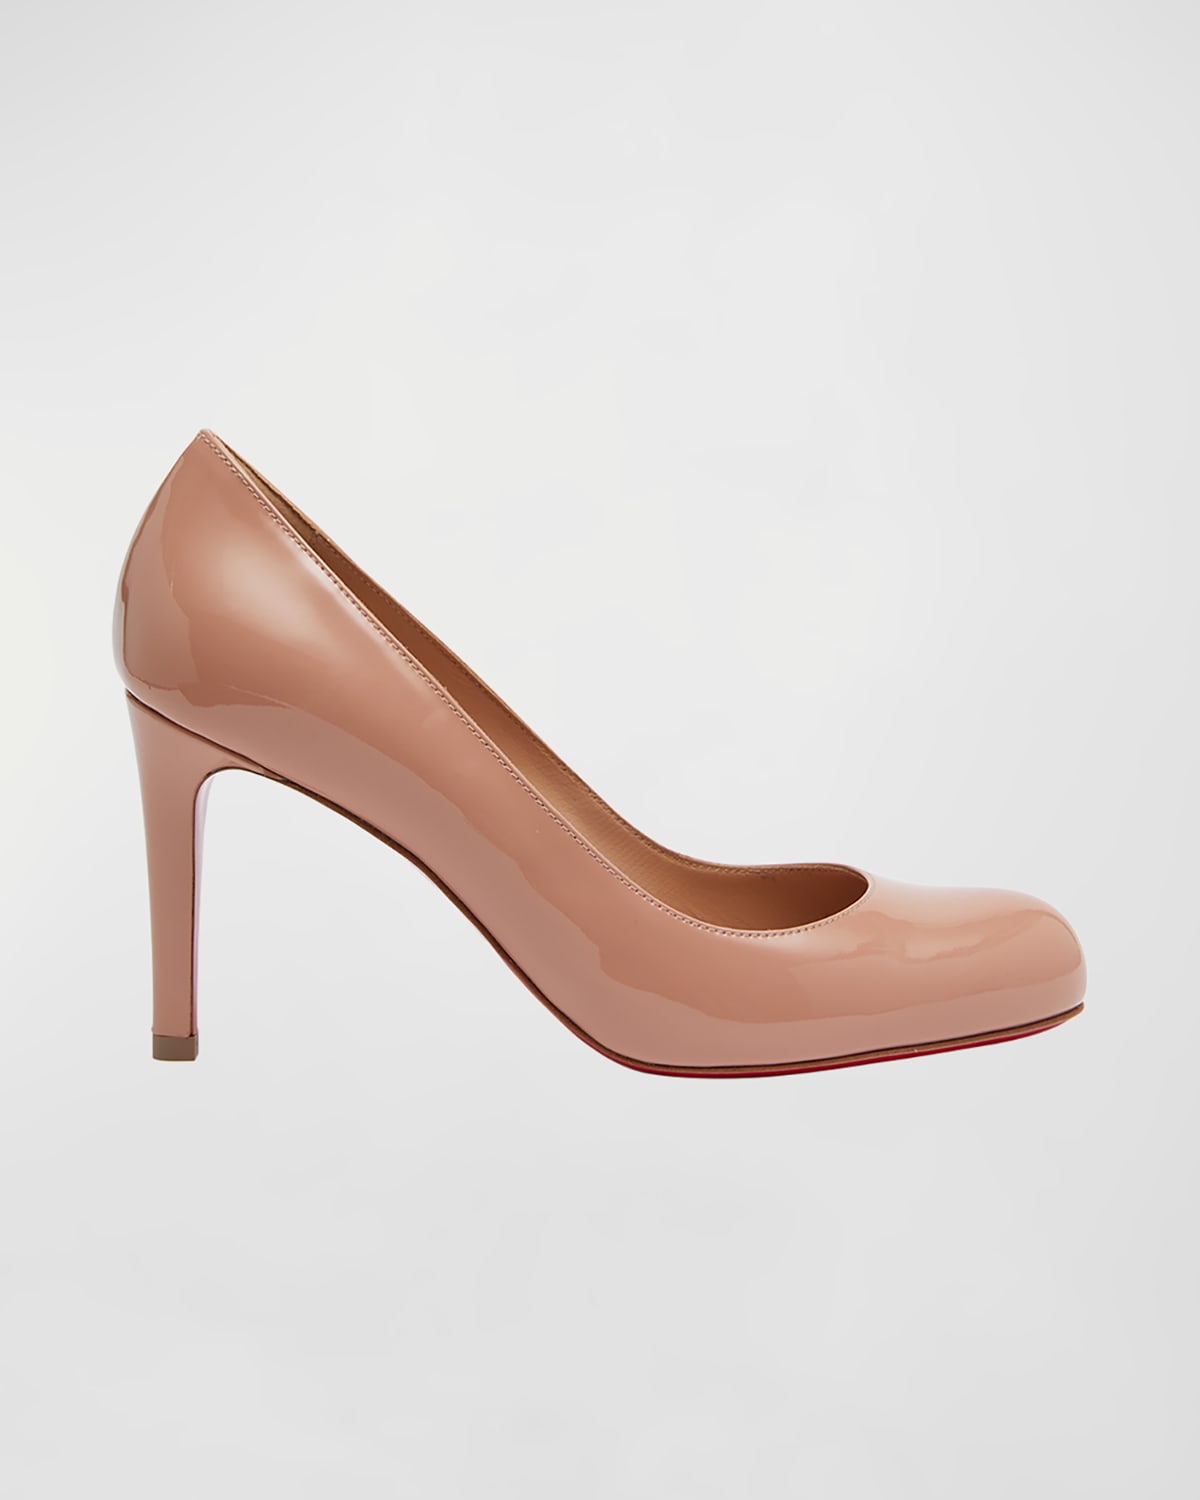 CHRISTIAN LOUBOUTIN PUMPPIE PATENT RED SOLE PUMPS